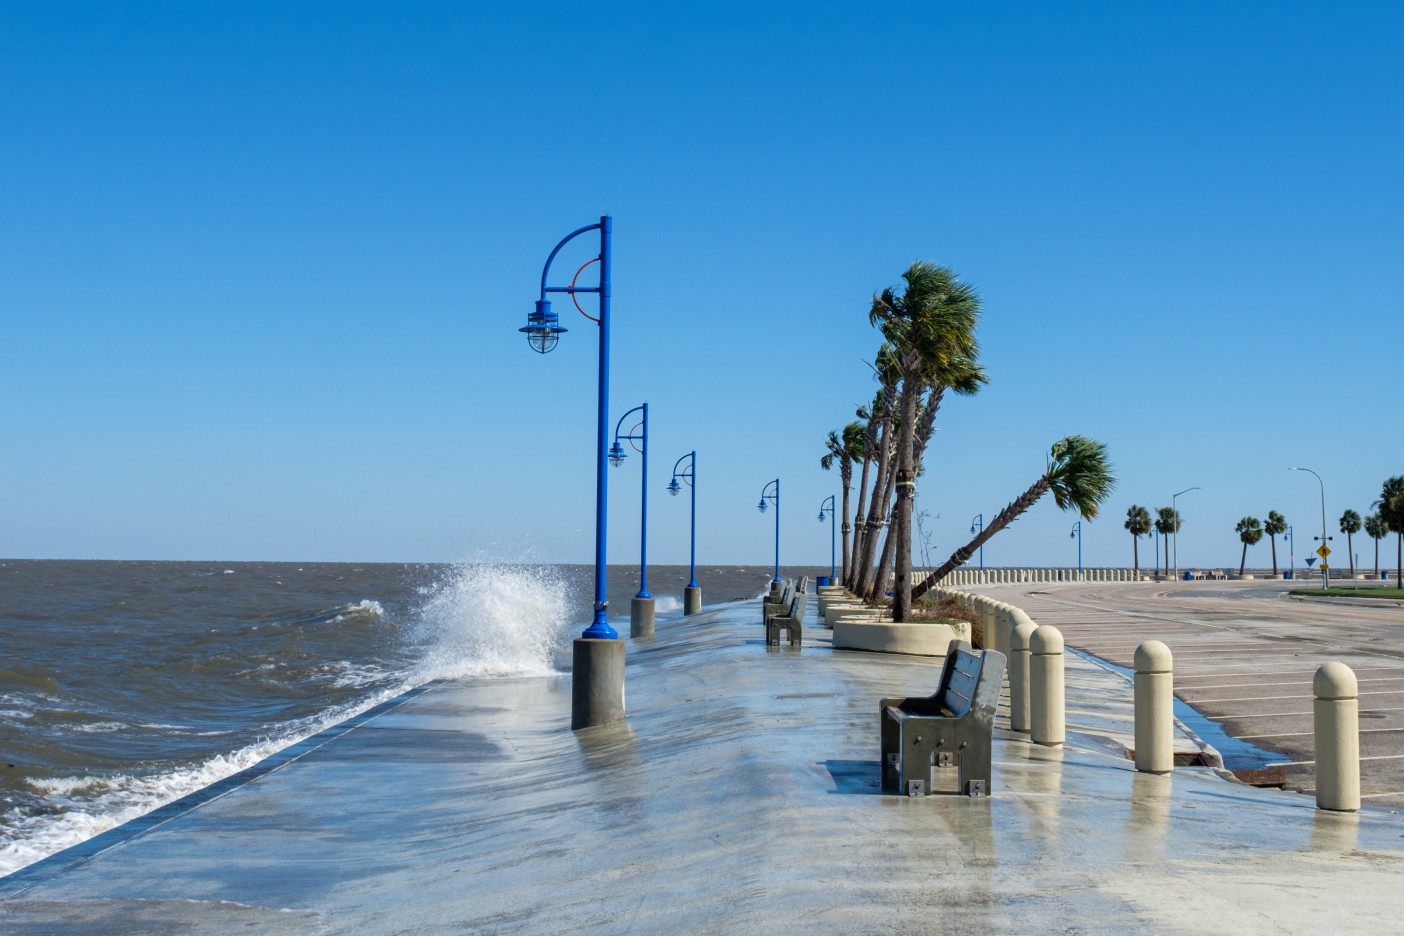 Waves on Lake Pontchartrain and Leaning Palm Tree in New Orleans Following Hurricane Zeta Licensed FILE #: 389910065 Preview Crop Find Similar DIMENSIONS 4012 x 2675px FILE TYPE JPEG CATEGORY The Environment LICENSE TYPE Standard or Extended Waves on Lake Pontchartrain